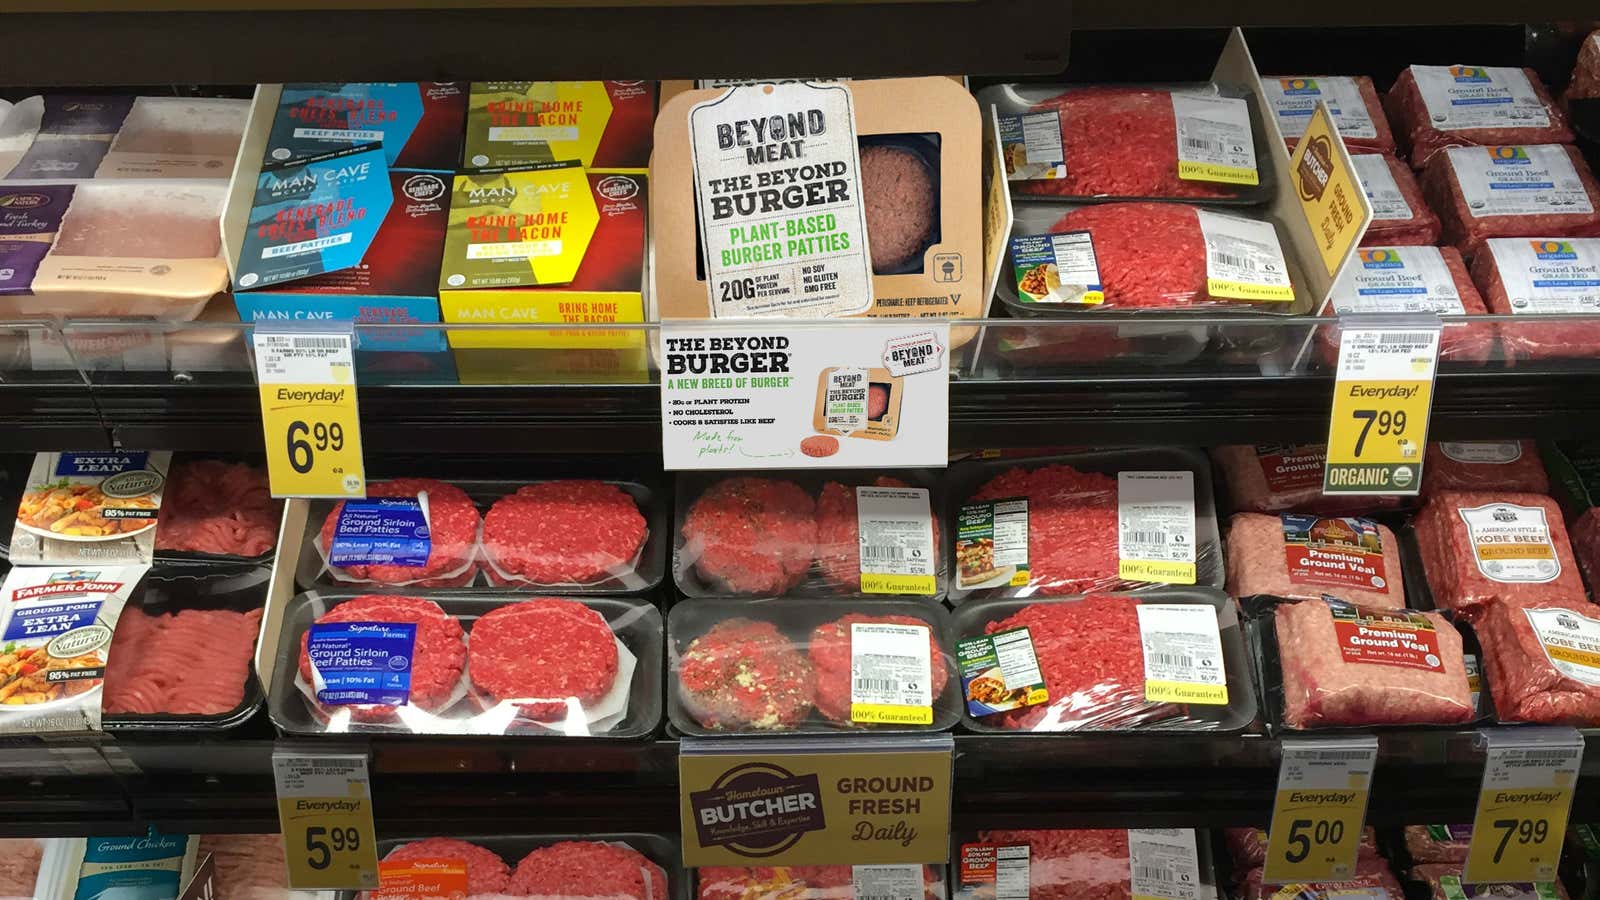 Beyond Meat's new improved burger hits grocery store shelves - Vox